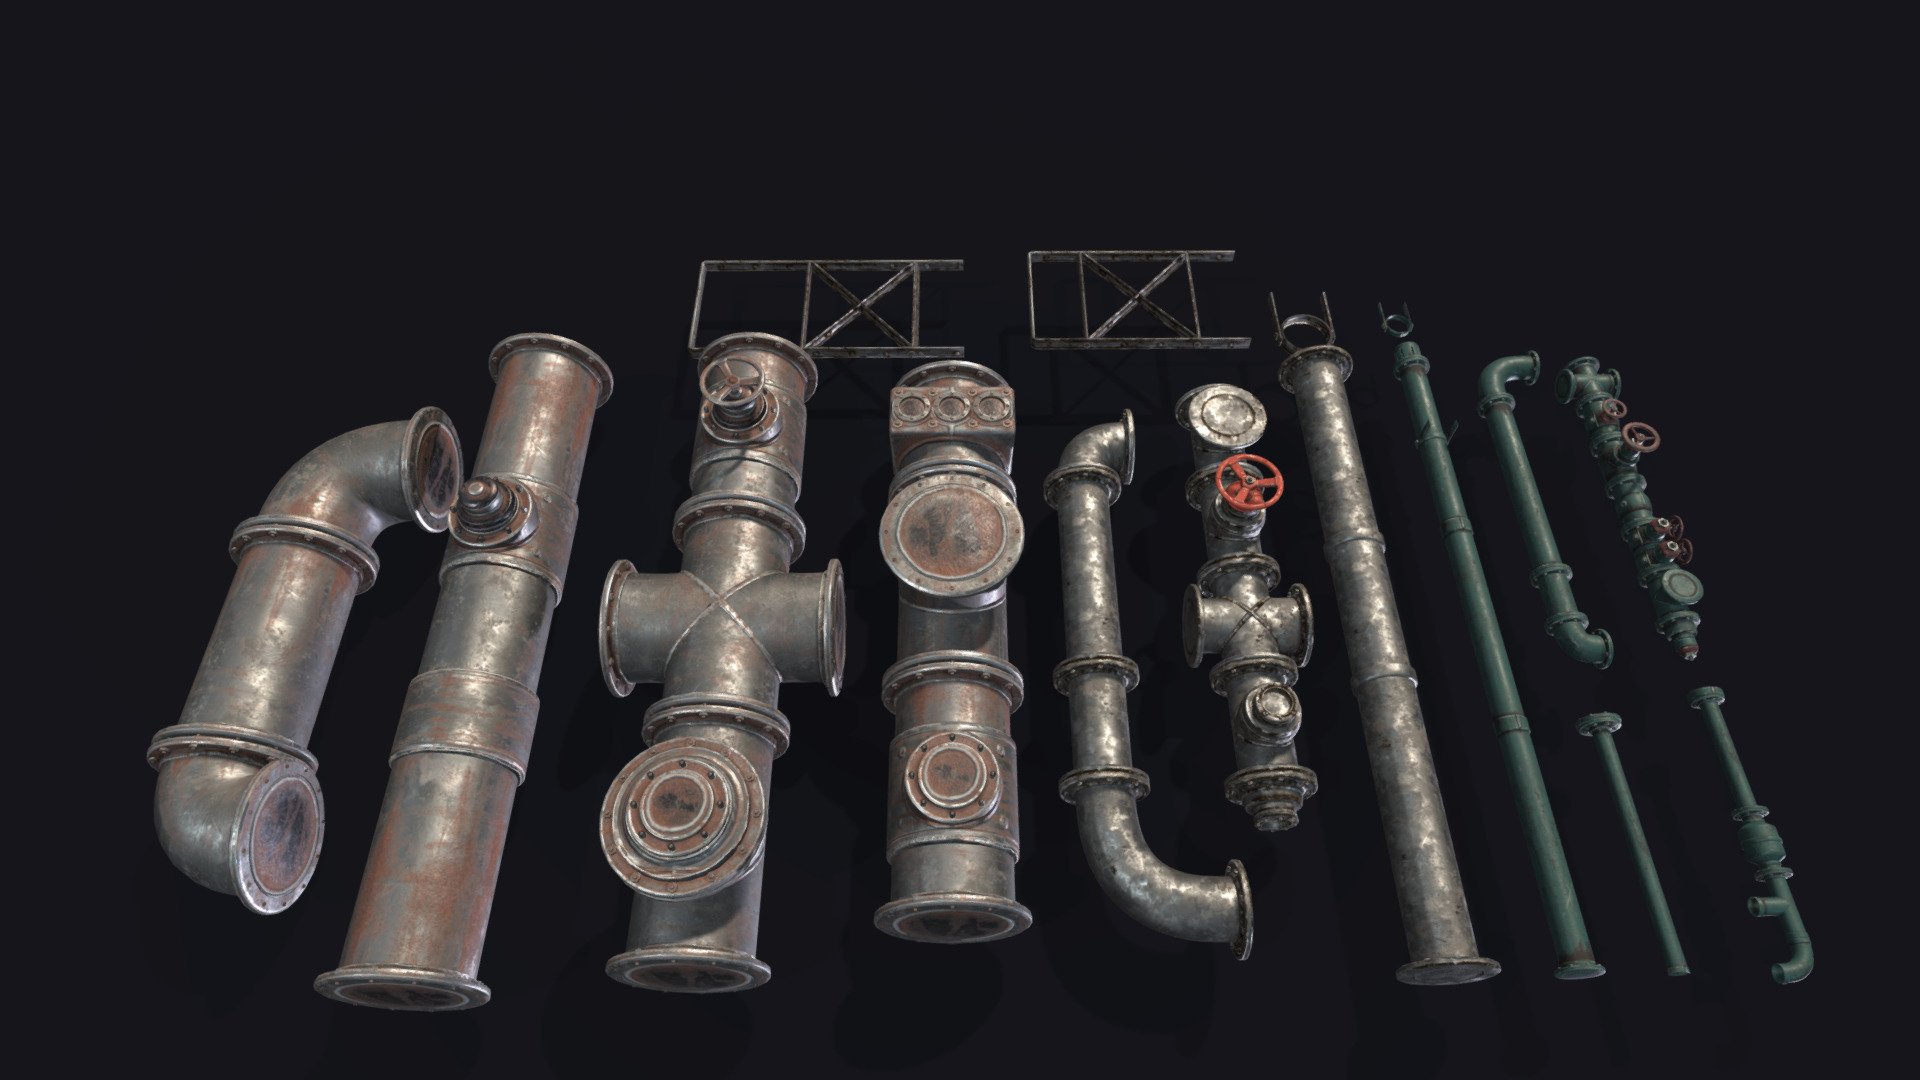 Support me on Patreon: https://www.patreon.com/feivelynart

Game ready low poly pipes, in four sizes, 
PBR textures, no LODs

Made in part with Autodesk educational software, no commercial use allowed - Industrial Set - Modular Pipes - Download Free 3D model by Feivelyn 3d model